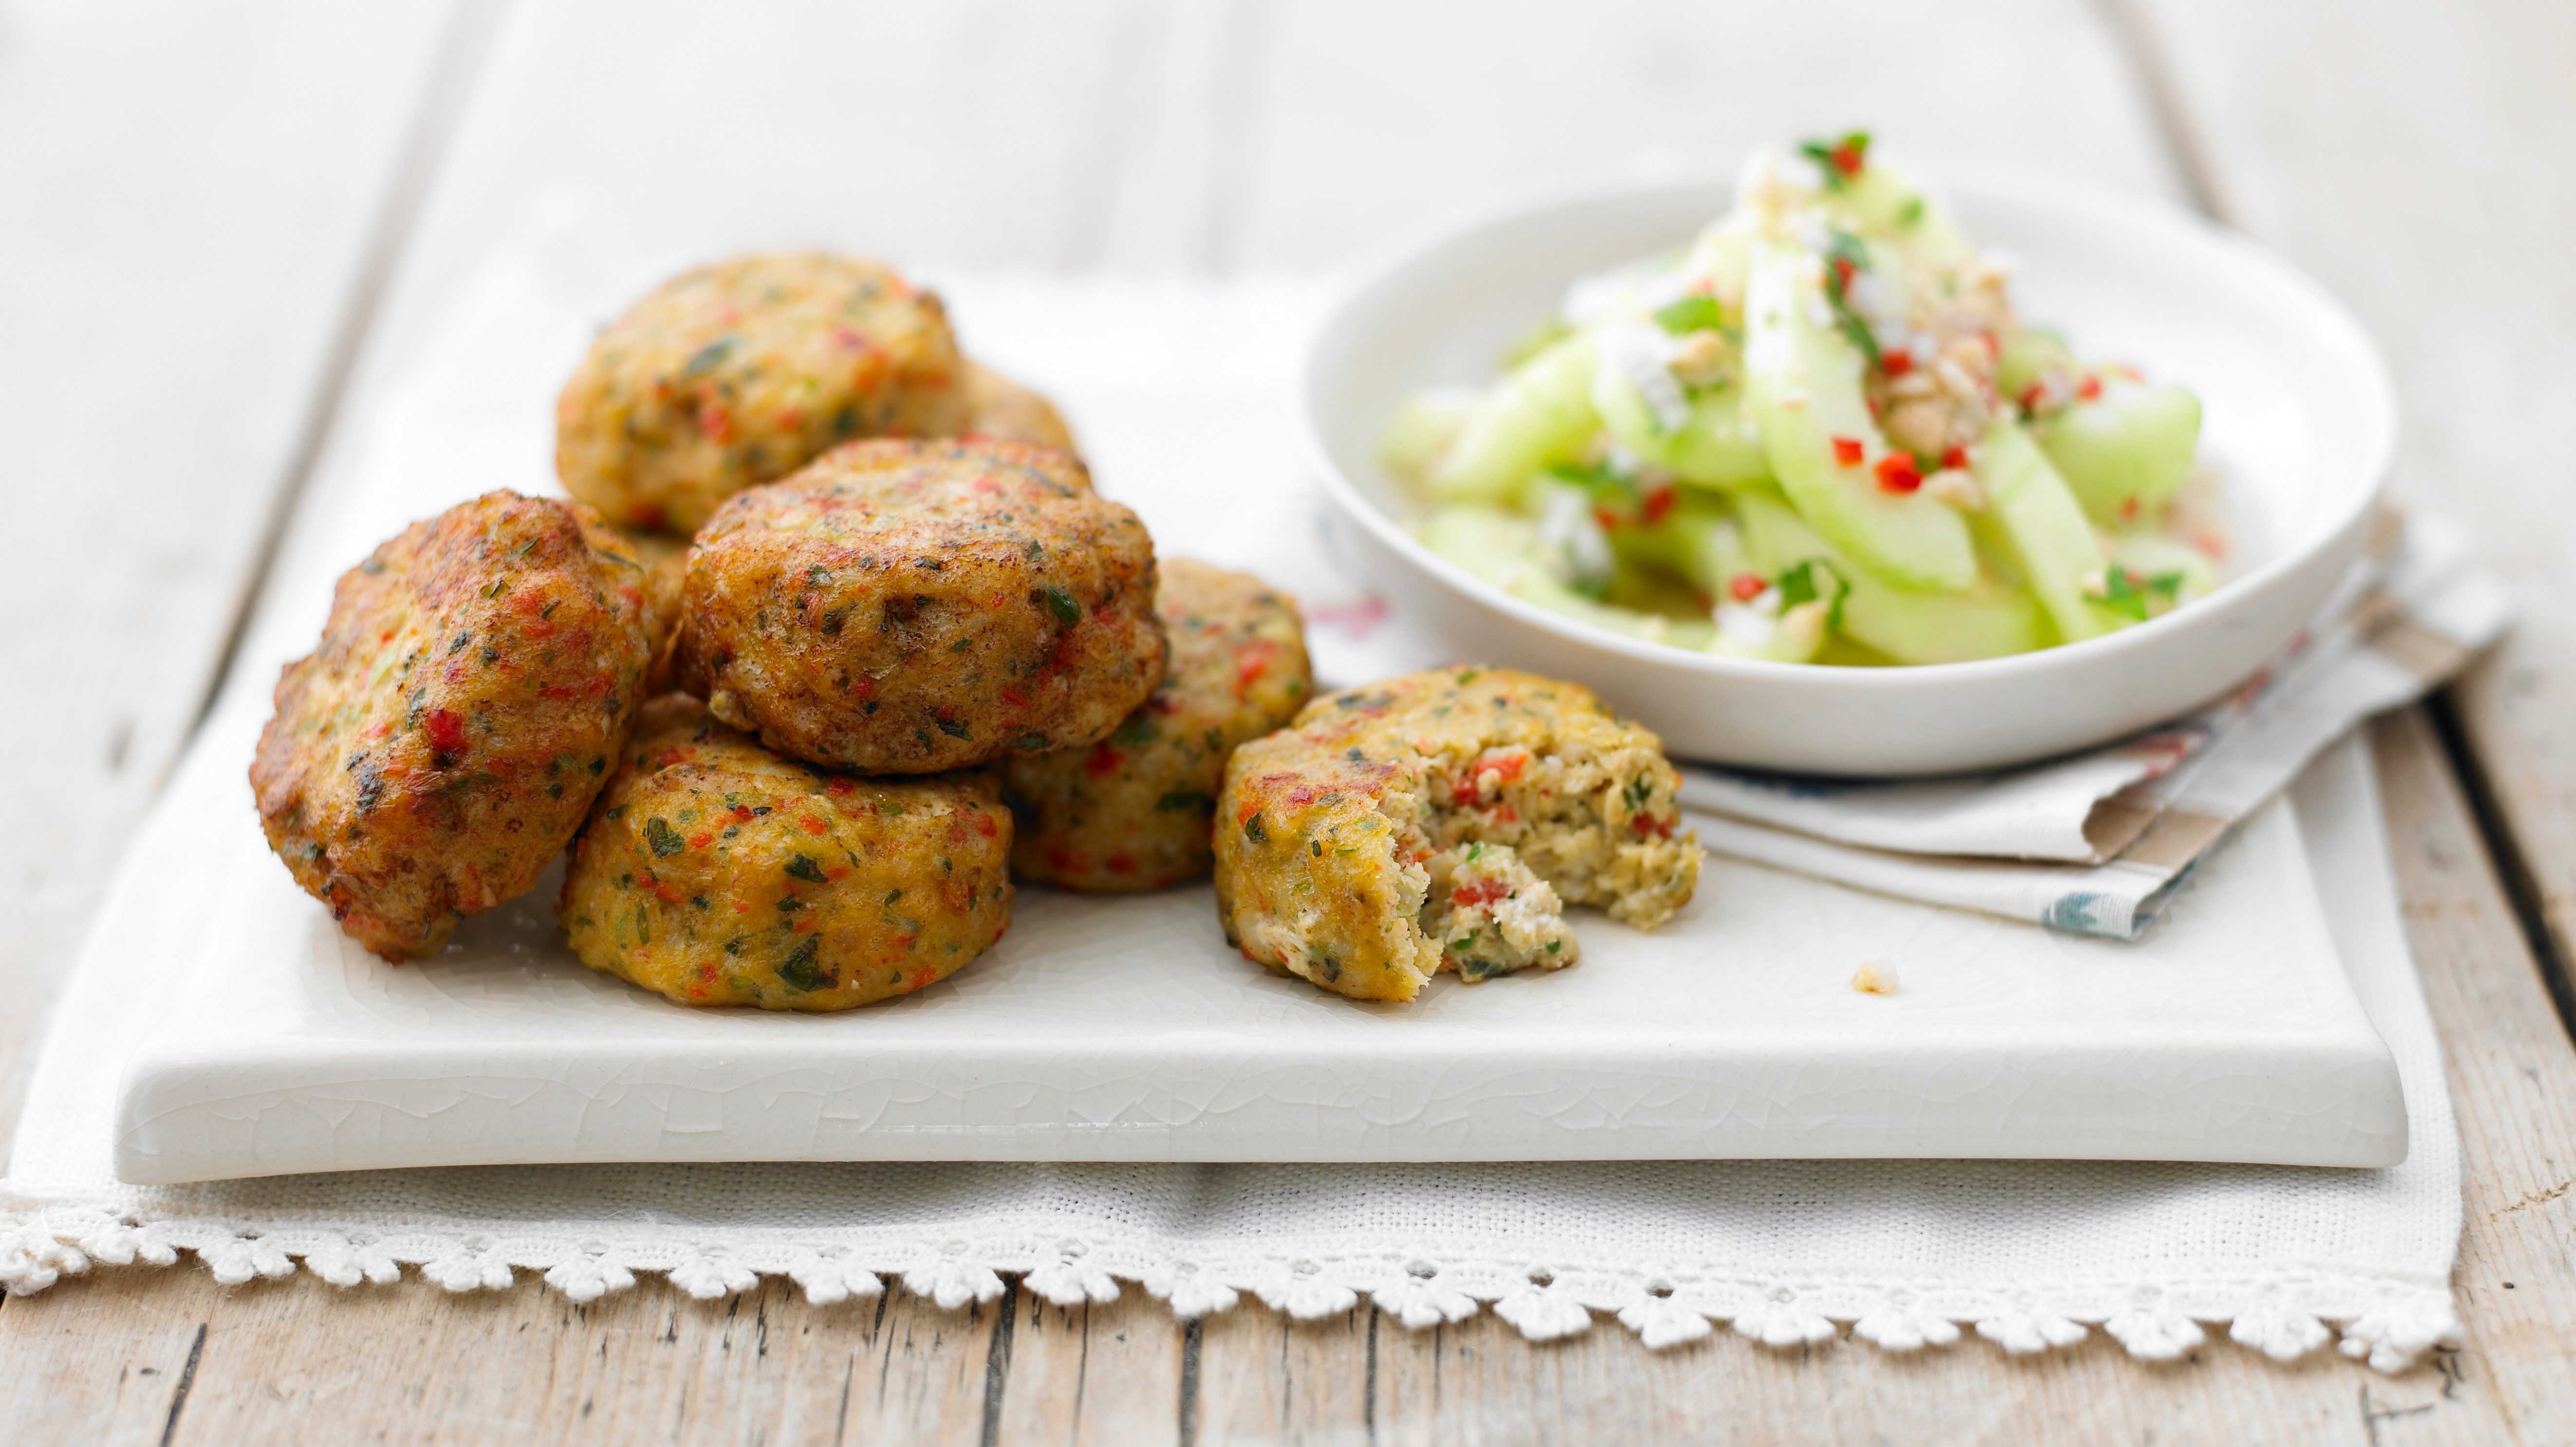 Thai Fish Cakes with Peanut Sauce • The Cook Report